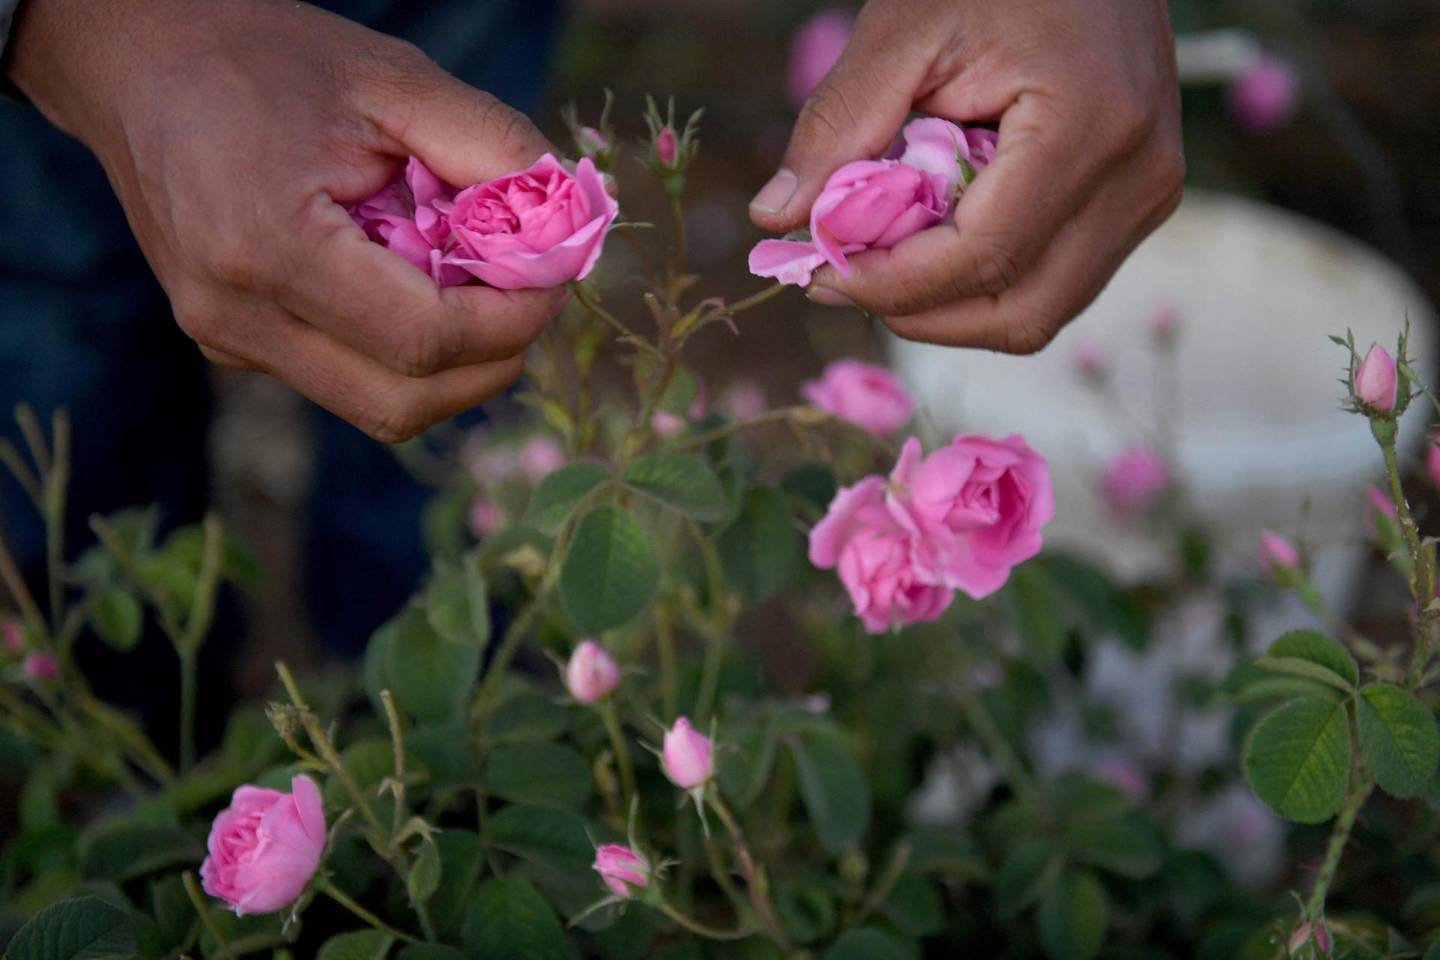 A worker picks Taif roses at the Bin Salman Farm in the Saudi city of Taif on March 13, 2021. The family farm is open to visitors and offers a complete rural experience including the viewing of the time-honoured tradition of extracting rose water and oil from the Taif rose, a prized component in the cosmetic, culinary and other industries. It has become synonymous with the city itself, dubbed locally as the City of Roses. / AFP / Amer HILABI
